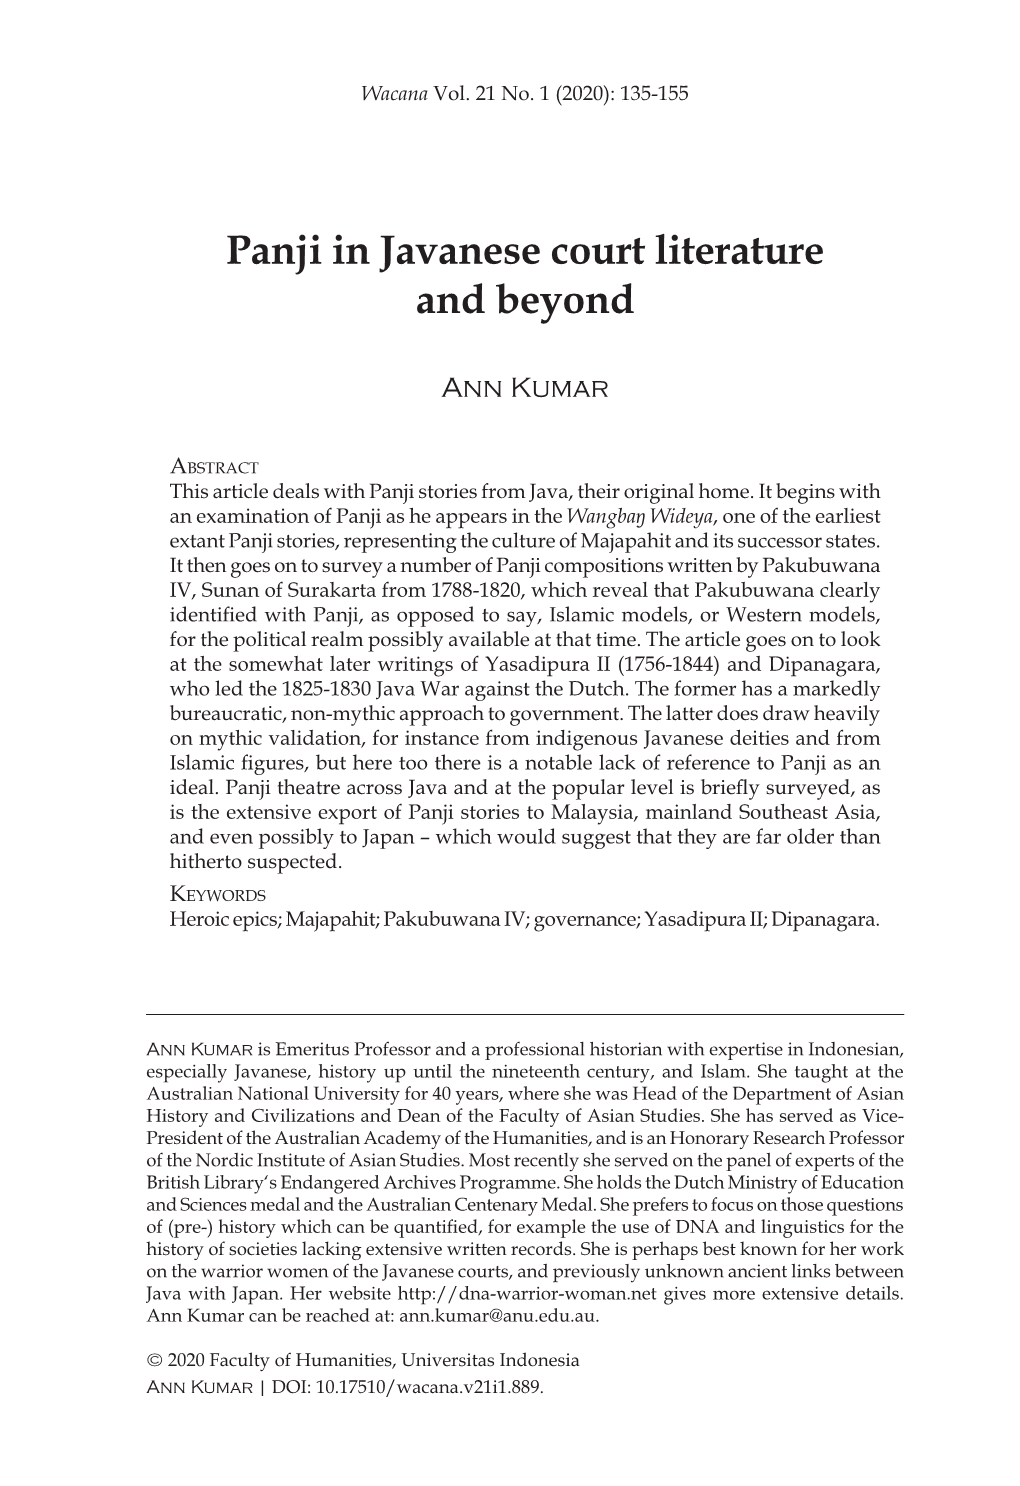 Panji in Javanese Court Literature and Beyond